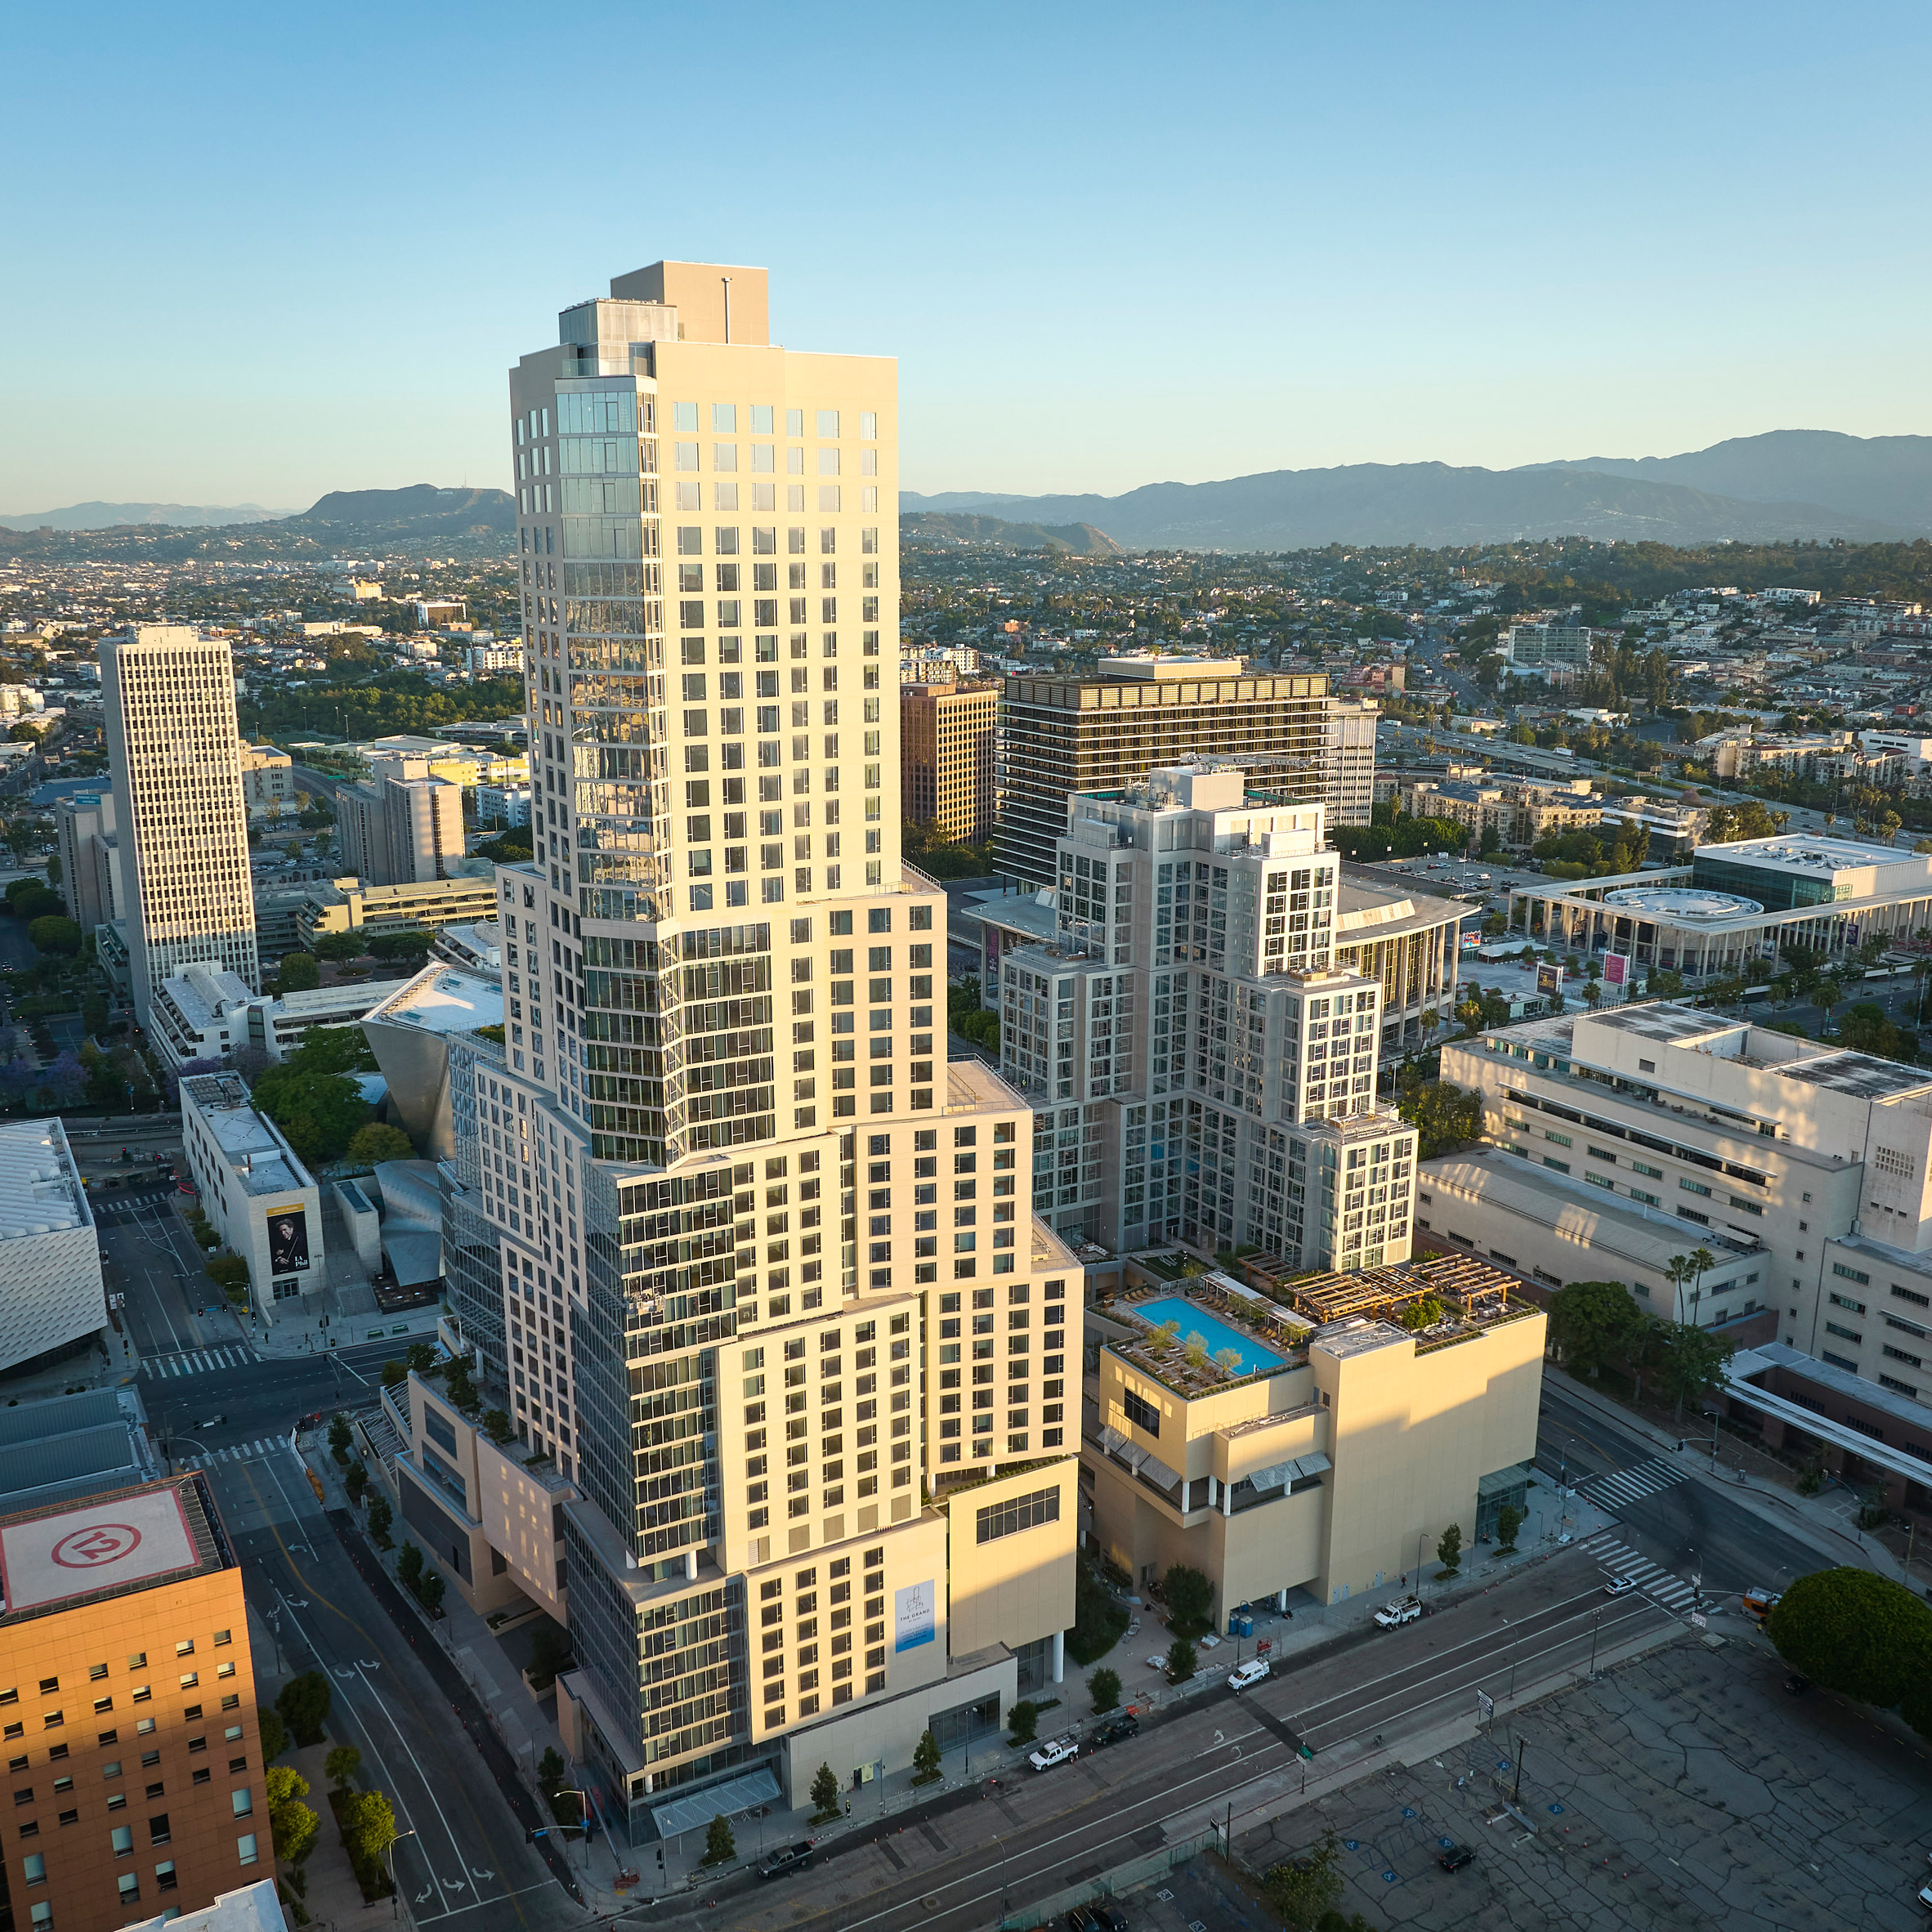 Frank Gehry's The Grand skyscrapers open in Los Angeles